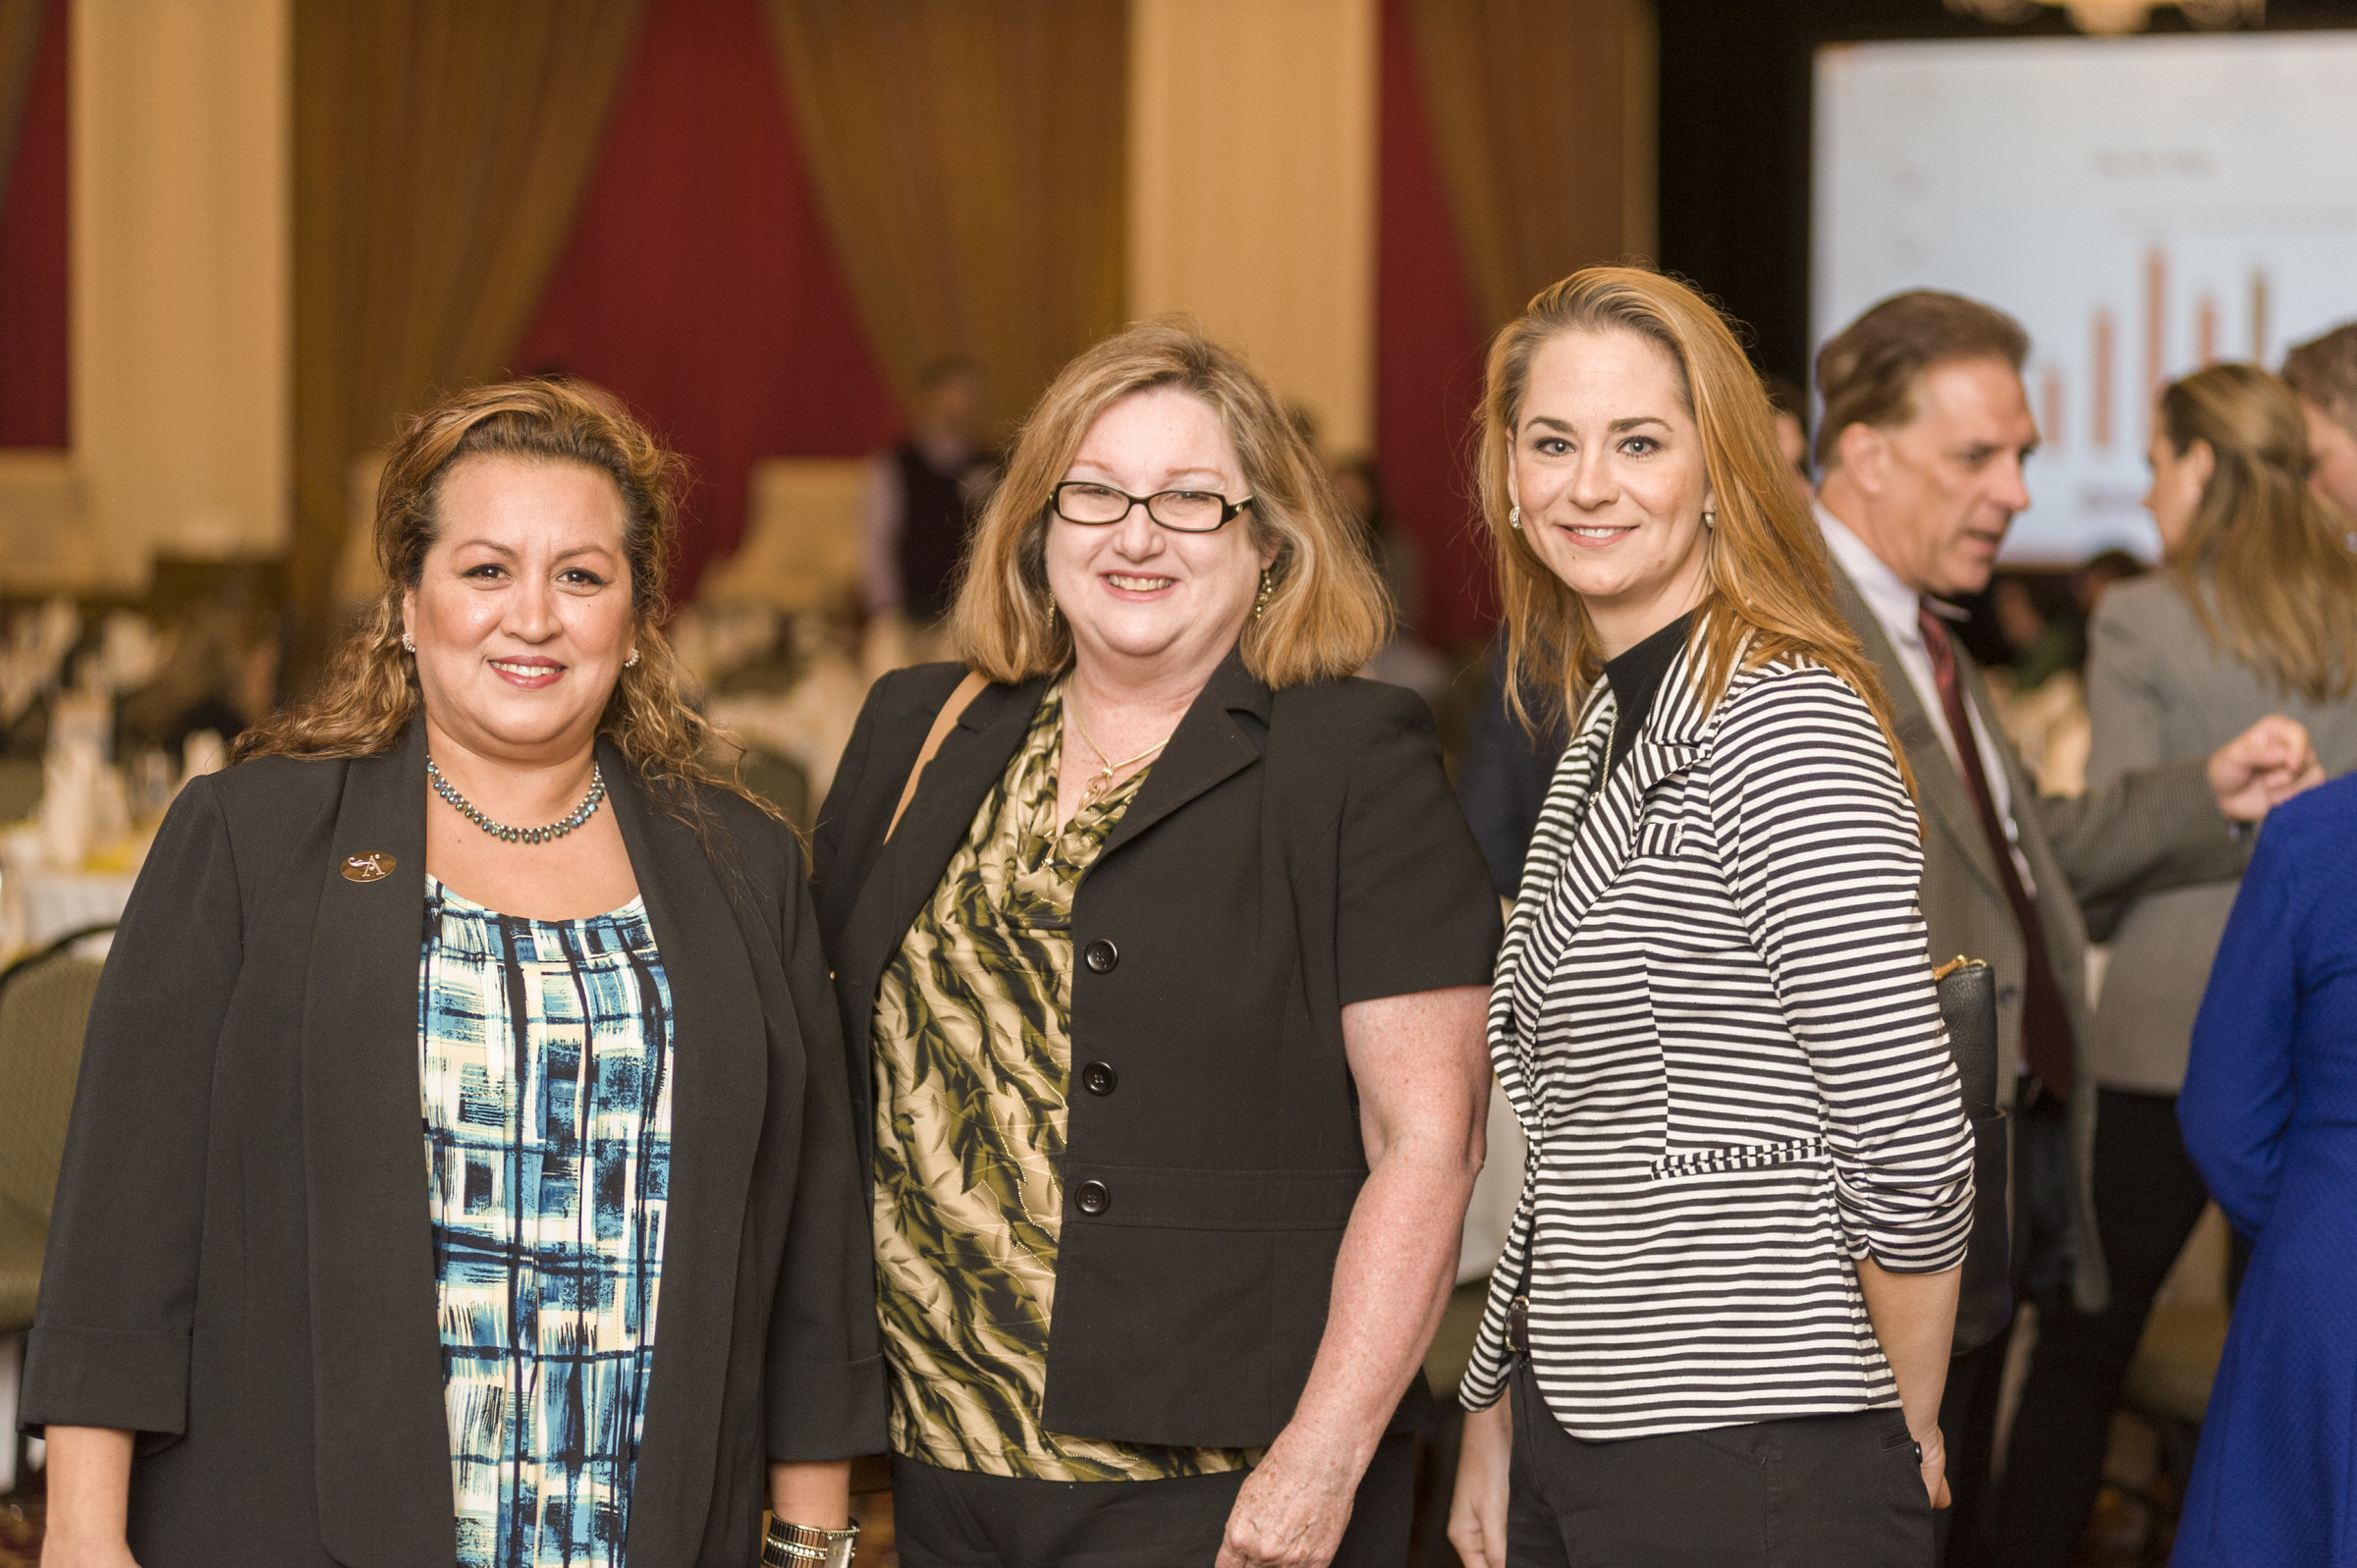 Houston Apartment Association presented its annual State of the Industry market outlook panel discussion on Tuesday, January 26, 2016, at the Hilton Post Oak Hotel. (Photograph by Mark Hiebert, HiebertStock.com)